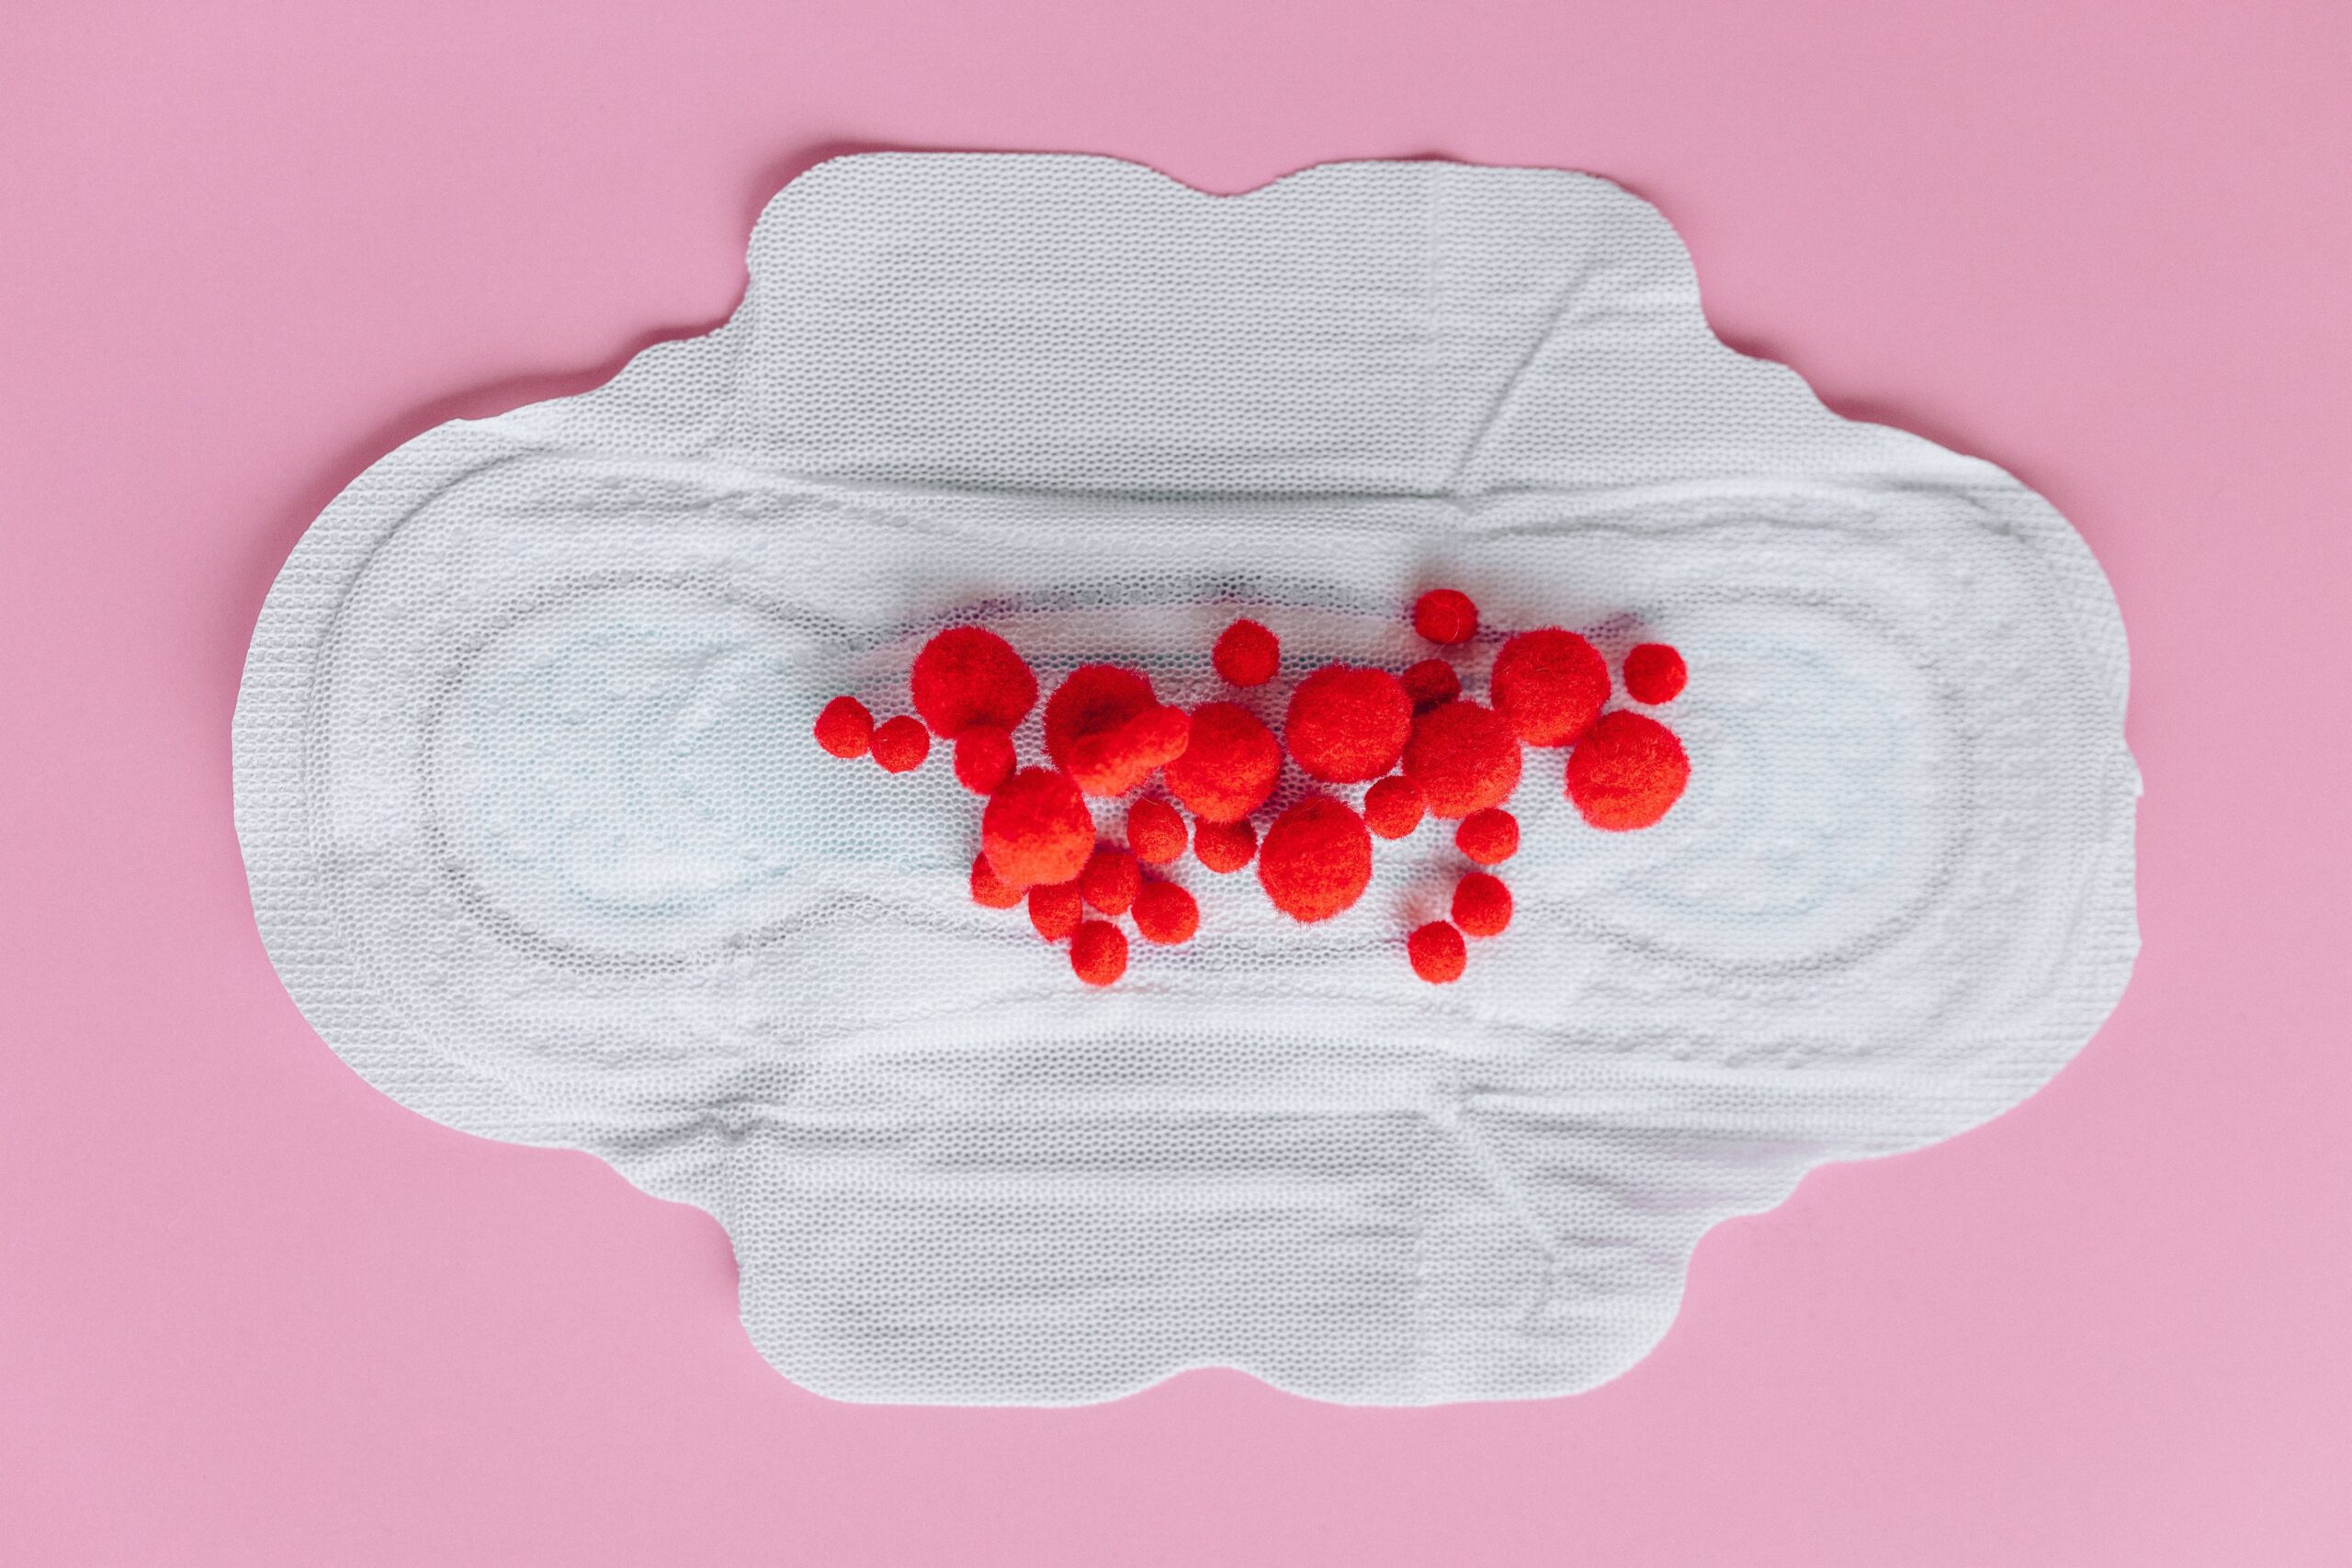 Can Intercourse Bring Your Period Down?